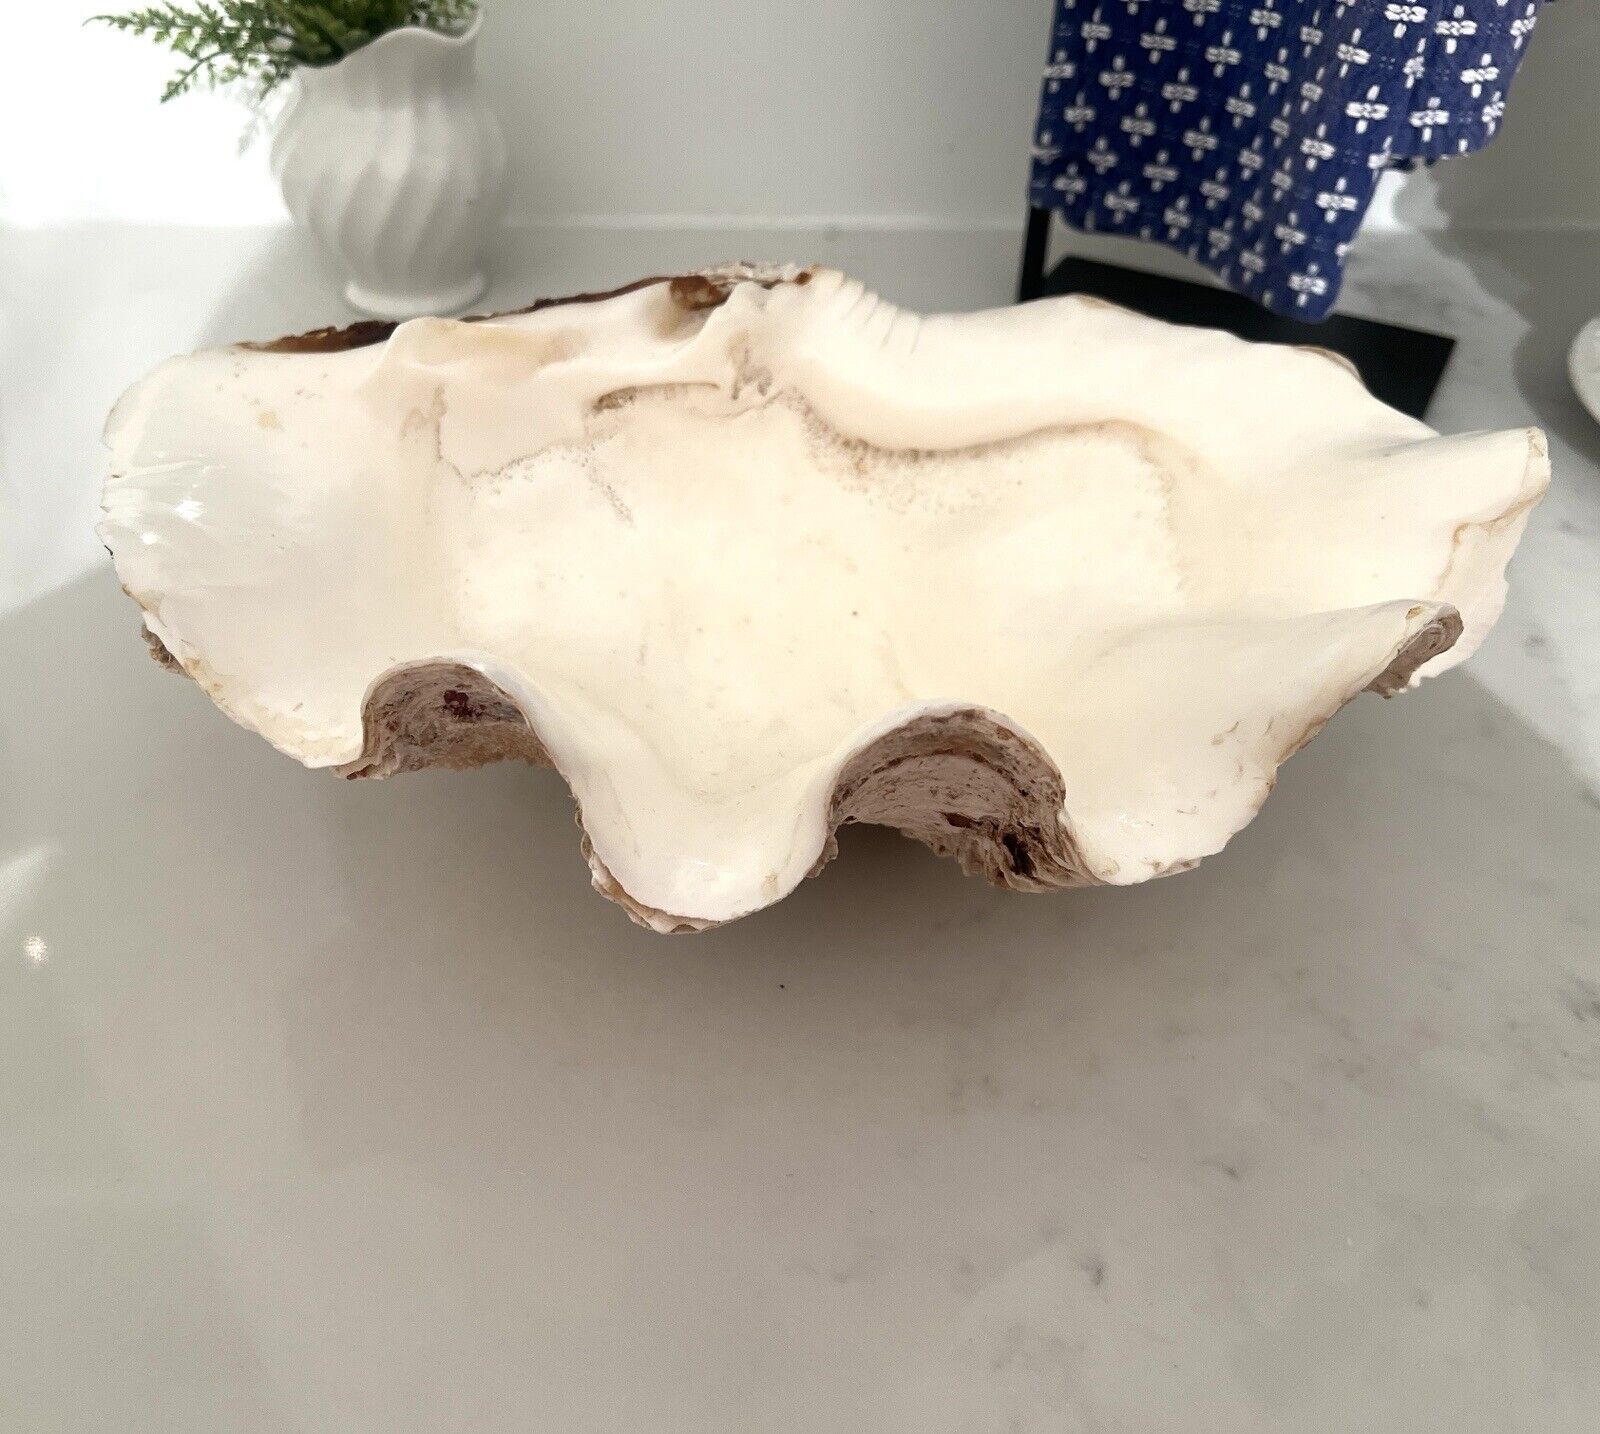 Genuine Ocean Large Clam Sea Shell Real Natural Tridacna Gigas 12” x 8”